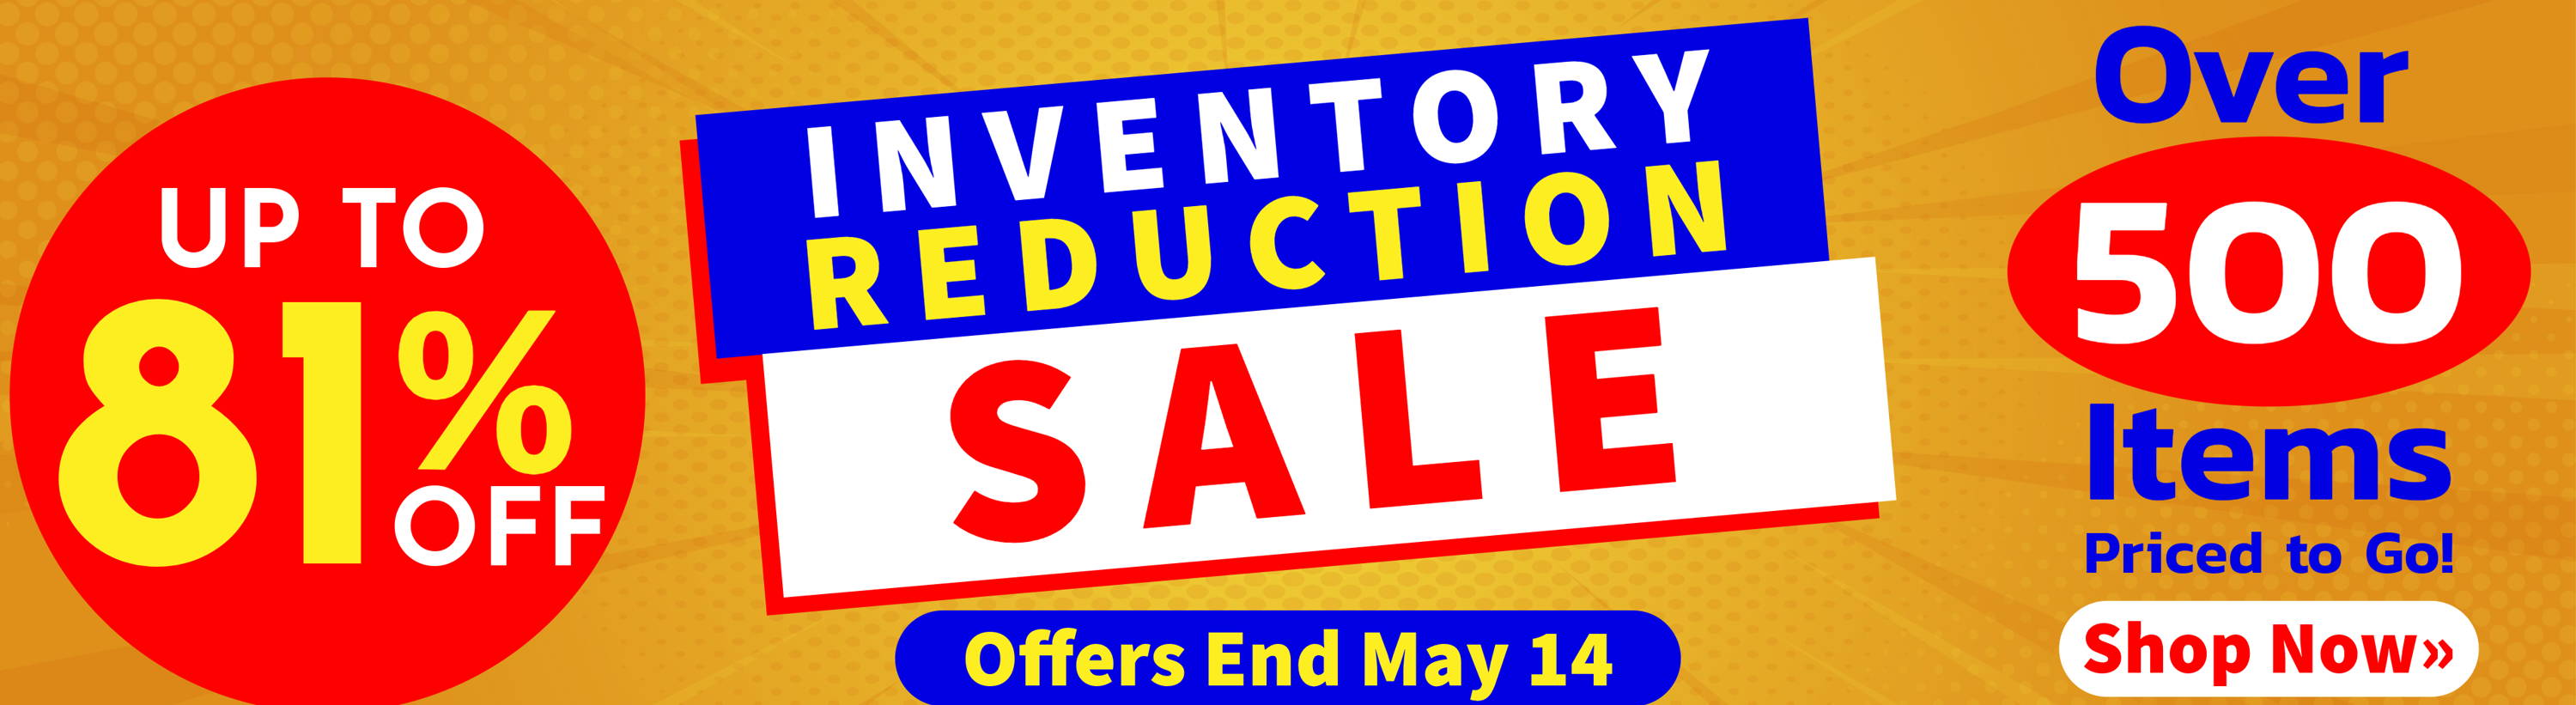 Inventory Reduction Sale - 500+ items up to 81% Off Until May 14. Image: stylized text.